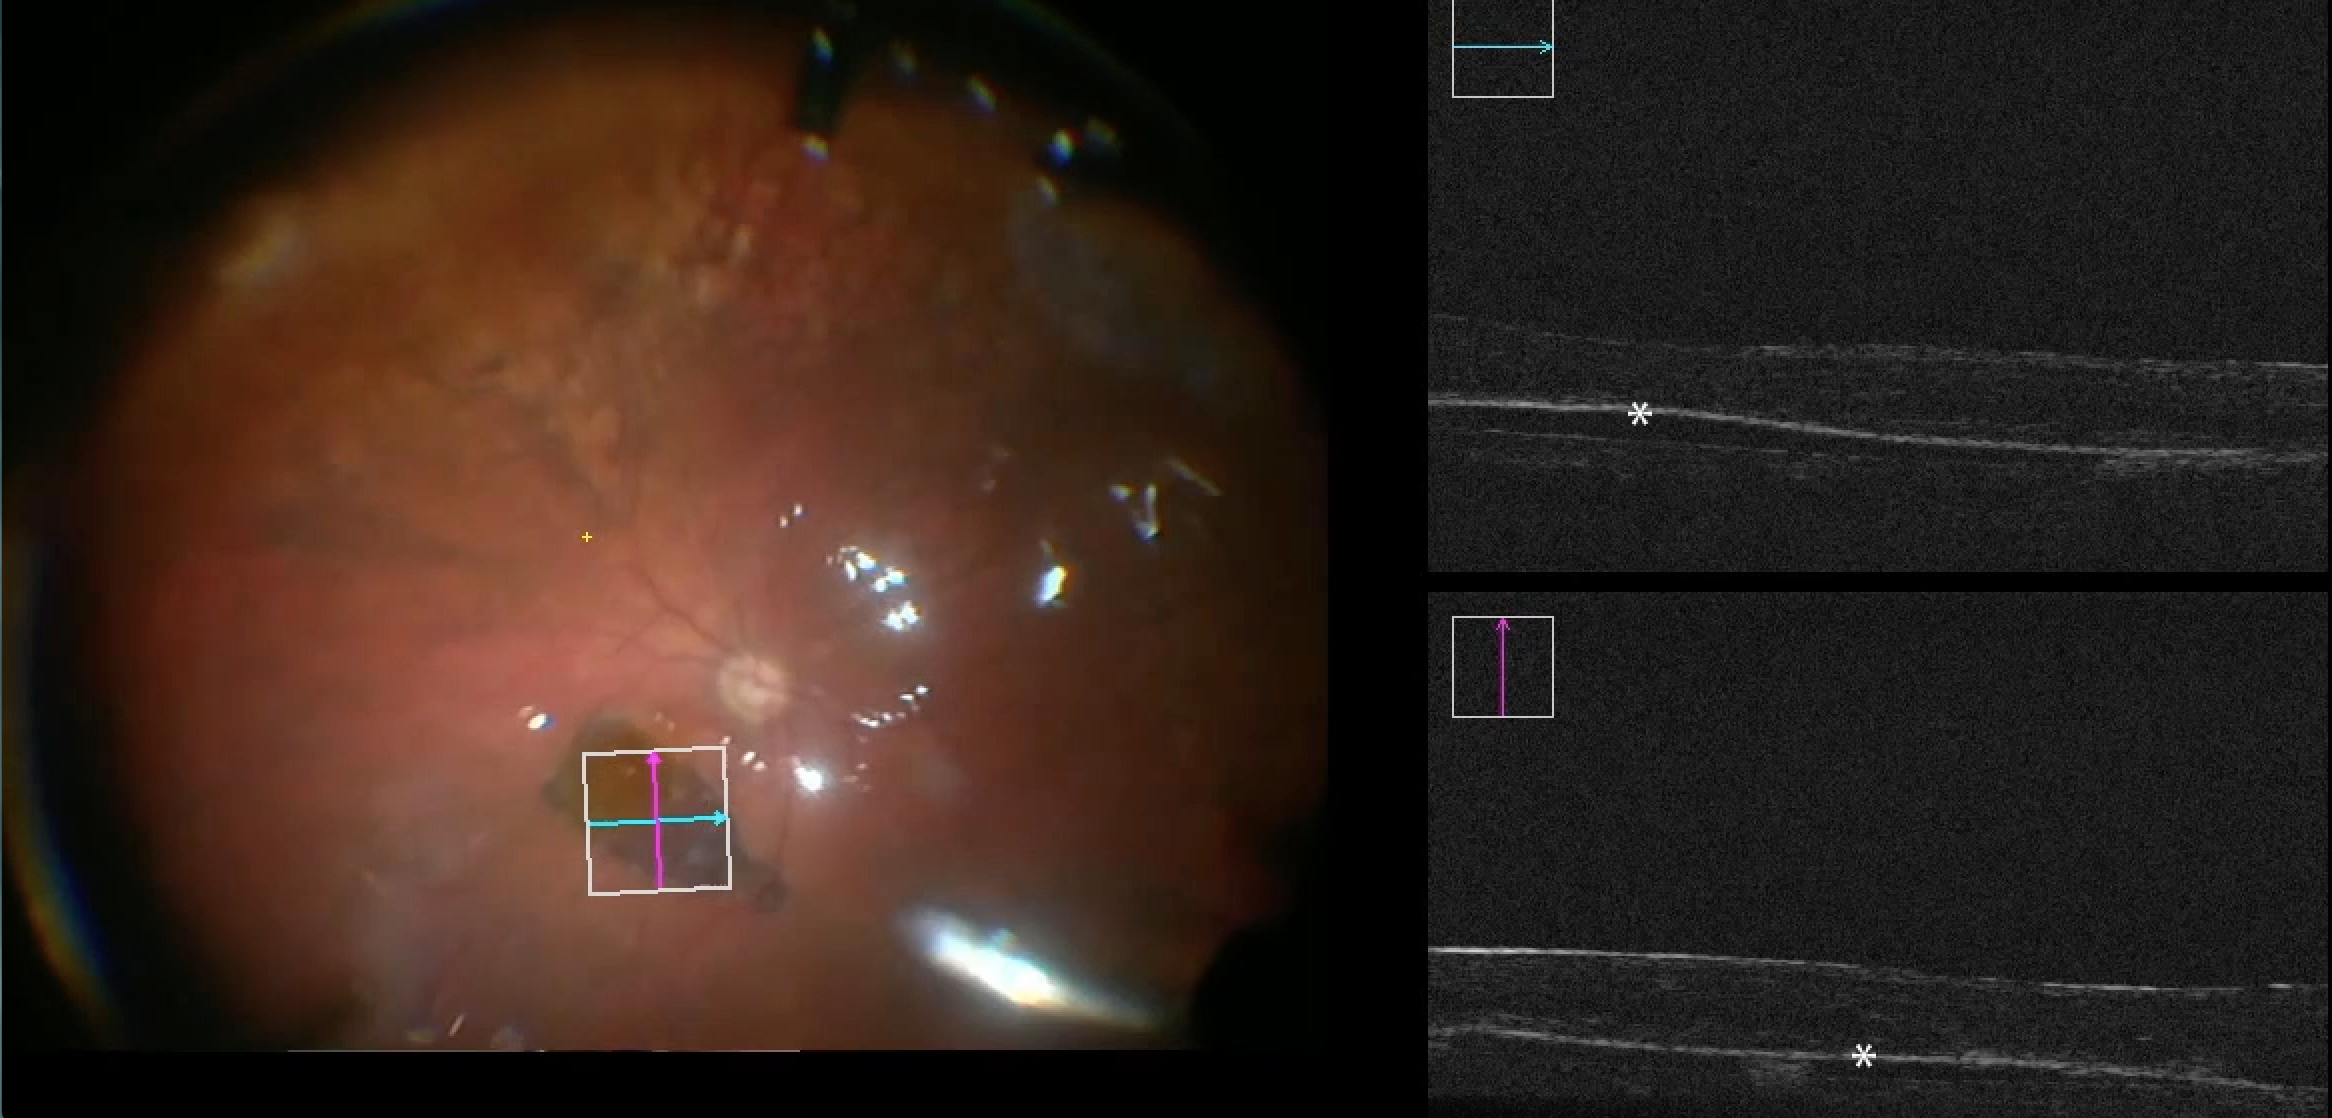 Intraoperative surgical methods hold key to AMD treatment